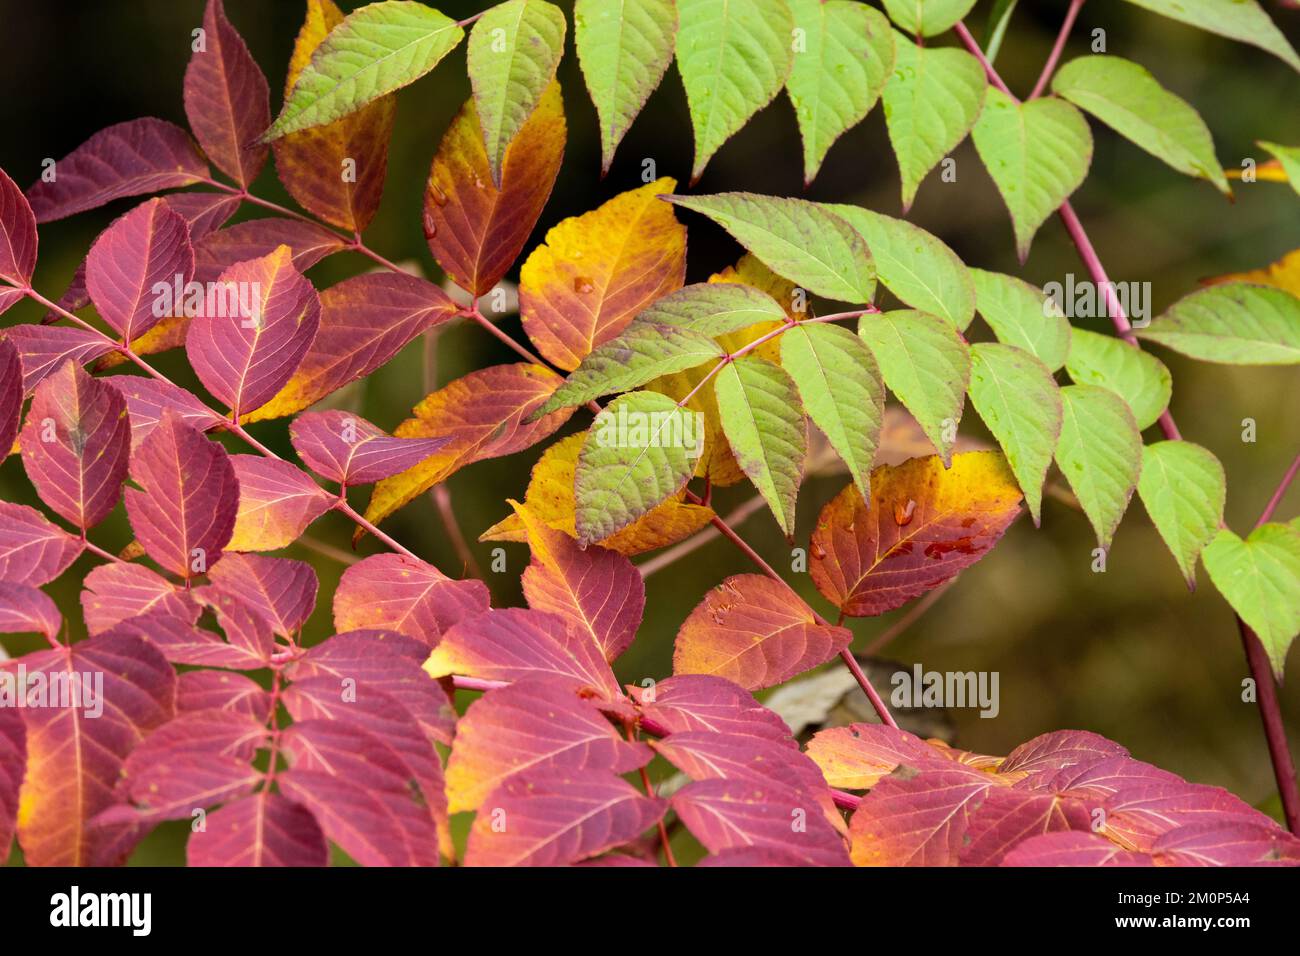 Vibrant and colorful leaves of a Japanese angelica tree plant during fall foliage in Europe Stock Photo